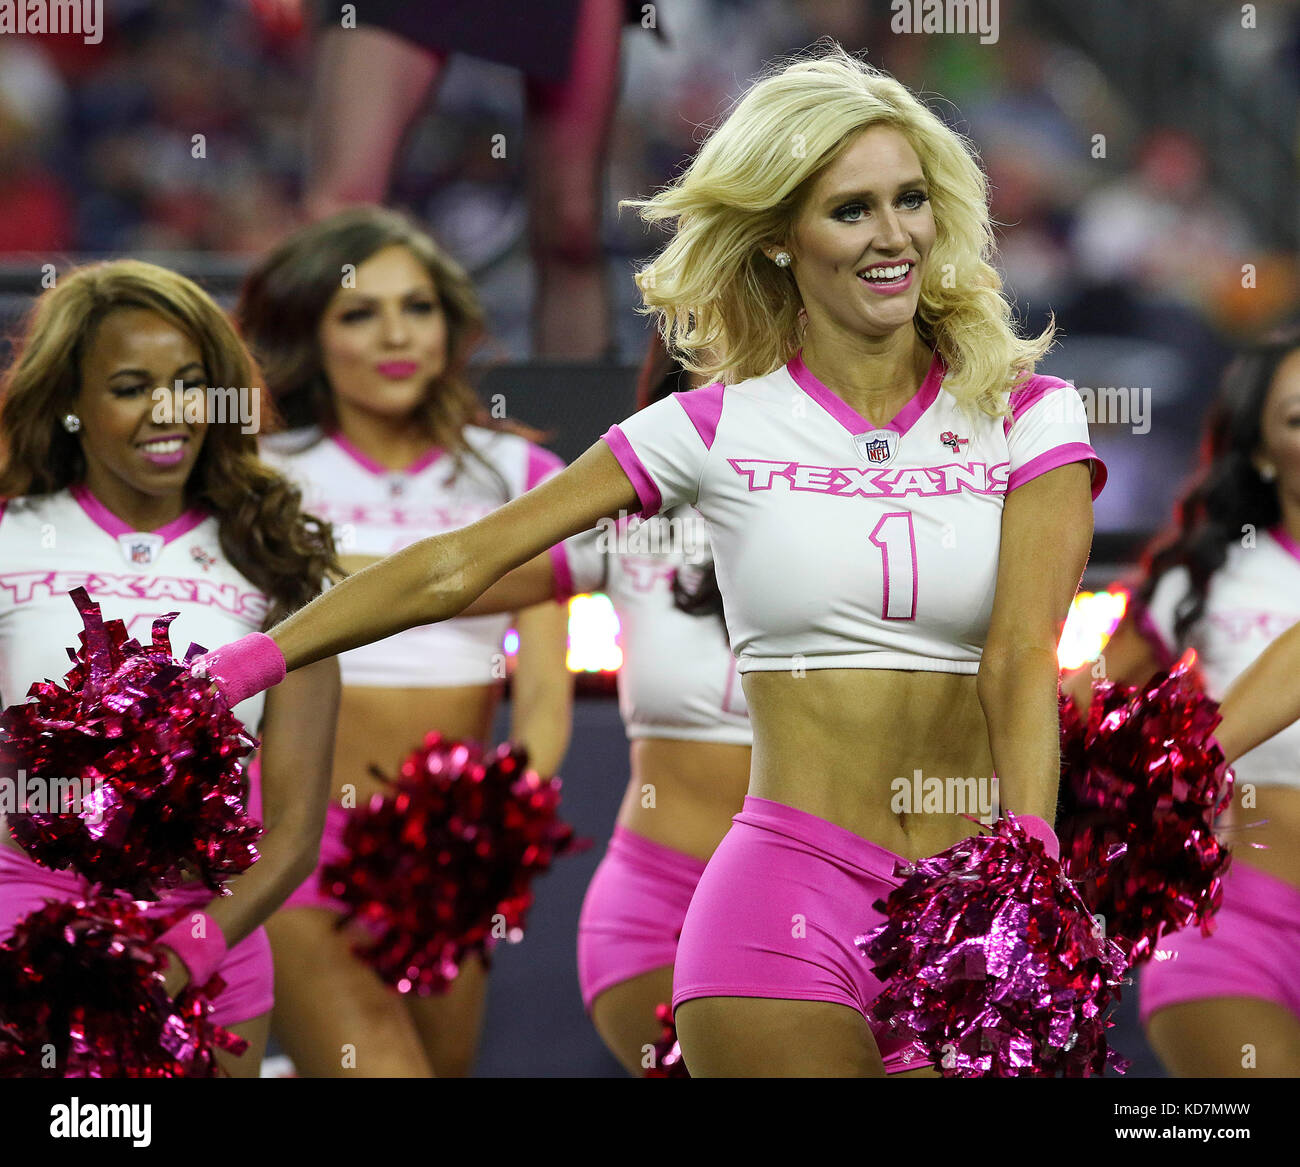 Houston, TX, USA. 8th Oct, 2017. A Houston Texans cheerleader during the NFL game between the Kansas City Chiefs and the Houston Texans at NRG Stadium in Houston, TX. John Glaser/CSM/Alamy Live News Stock Photo